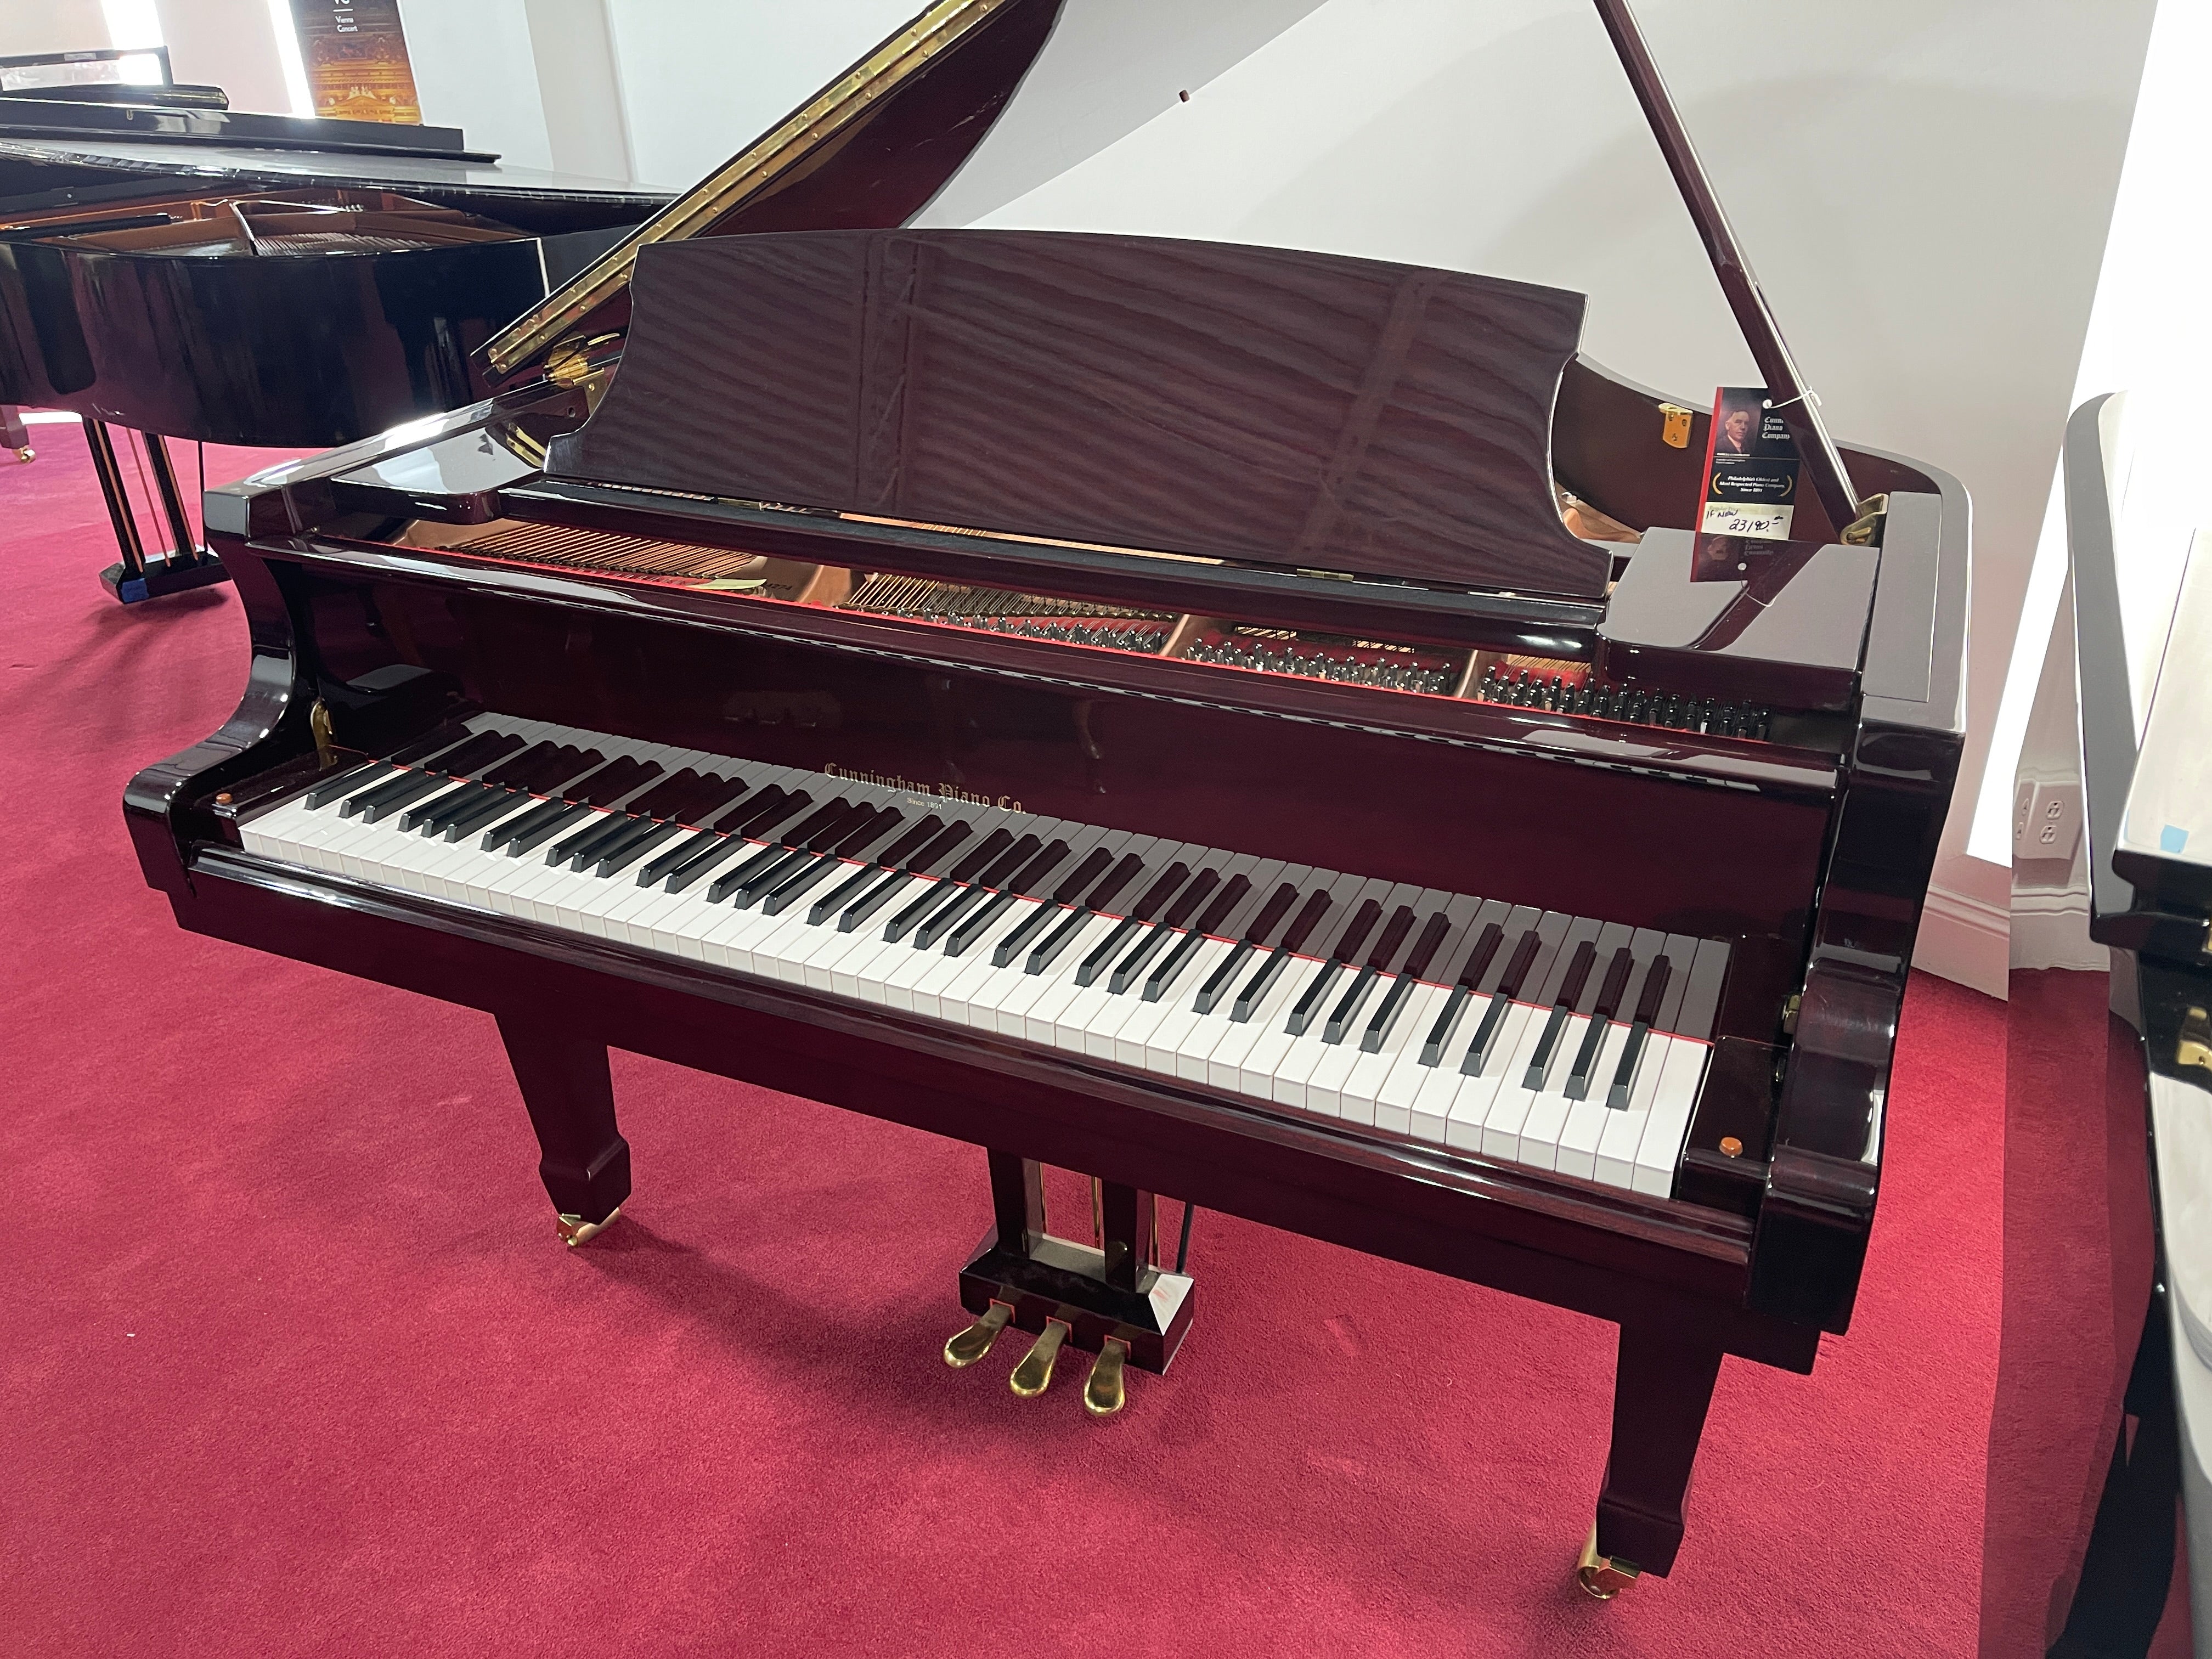 Cunningham 5'2" Grand Piano in Polished Mahogany Finish - Pre-Owned